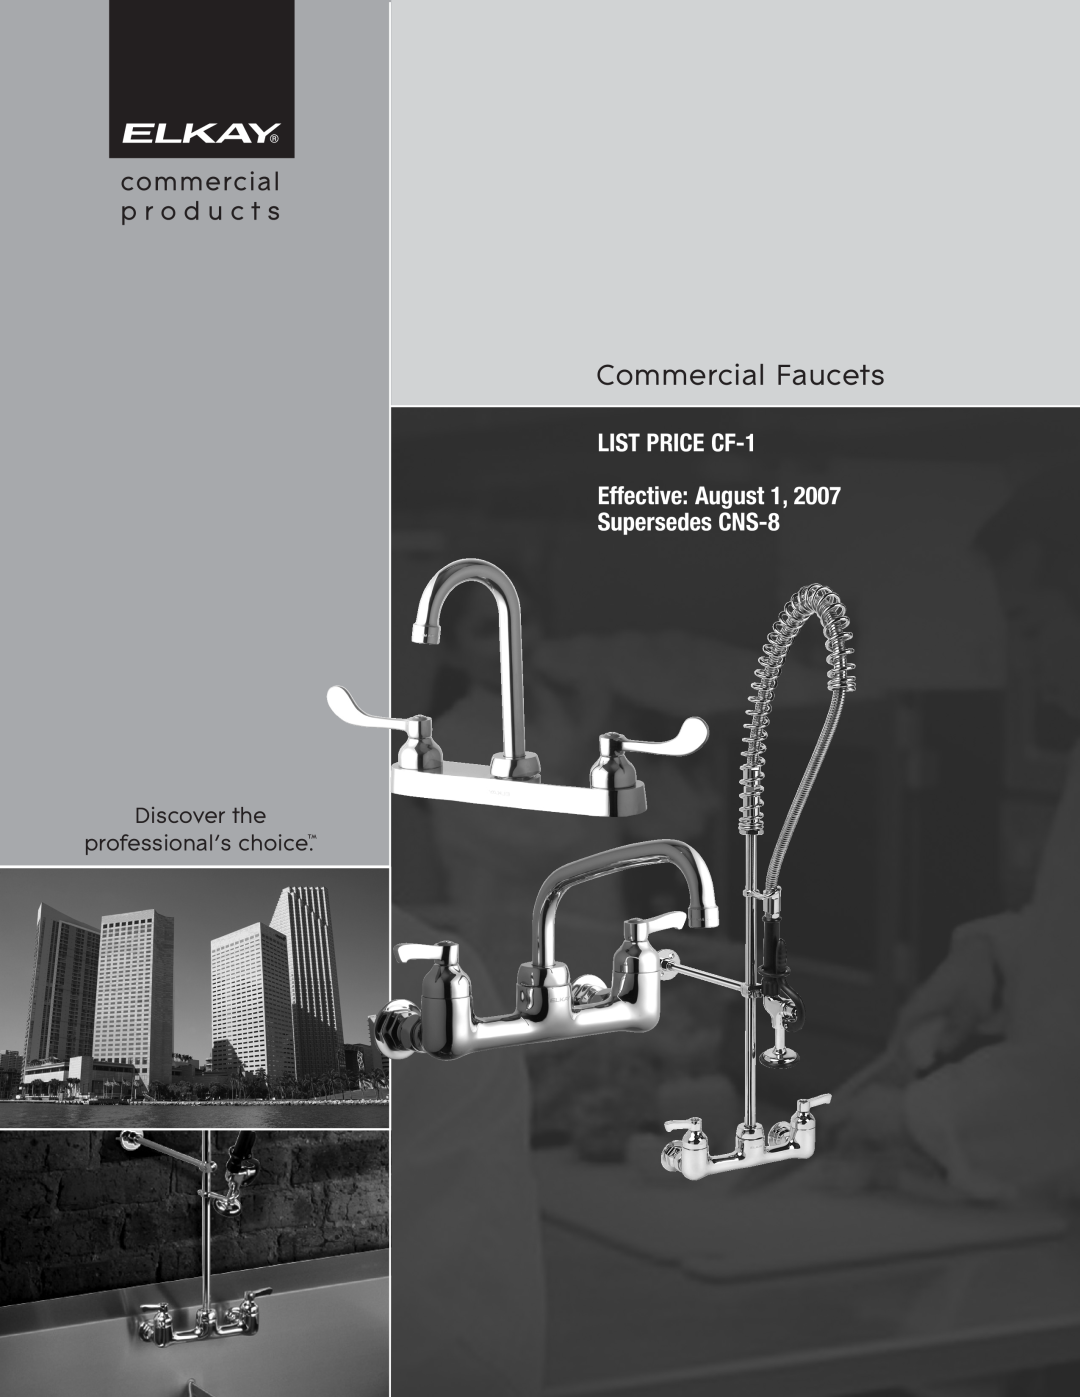 Elkay manual Commercial Faucets, LIST PRICE CF-1, Discover the professional’s choice 